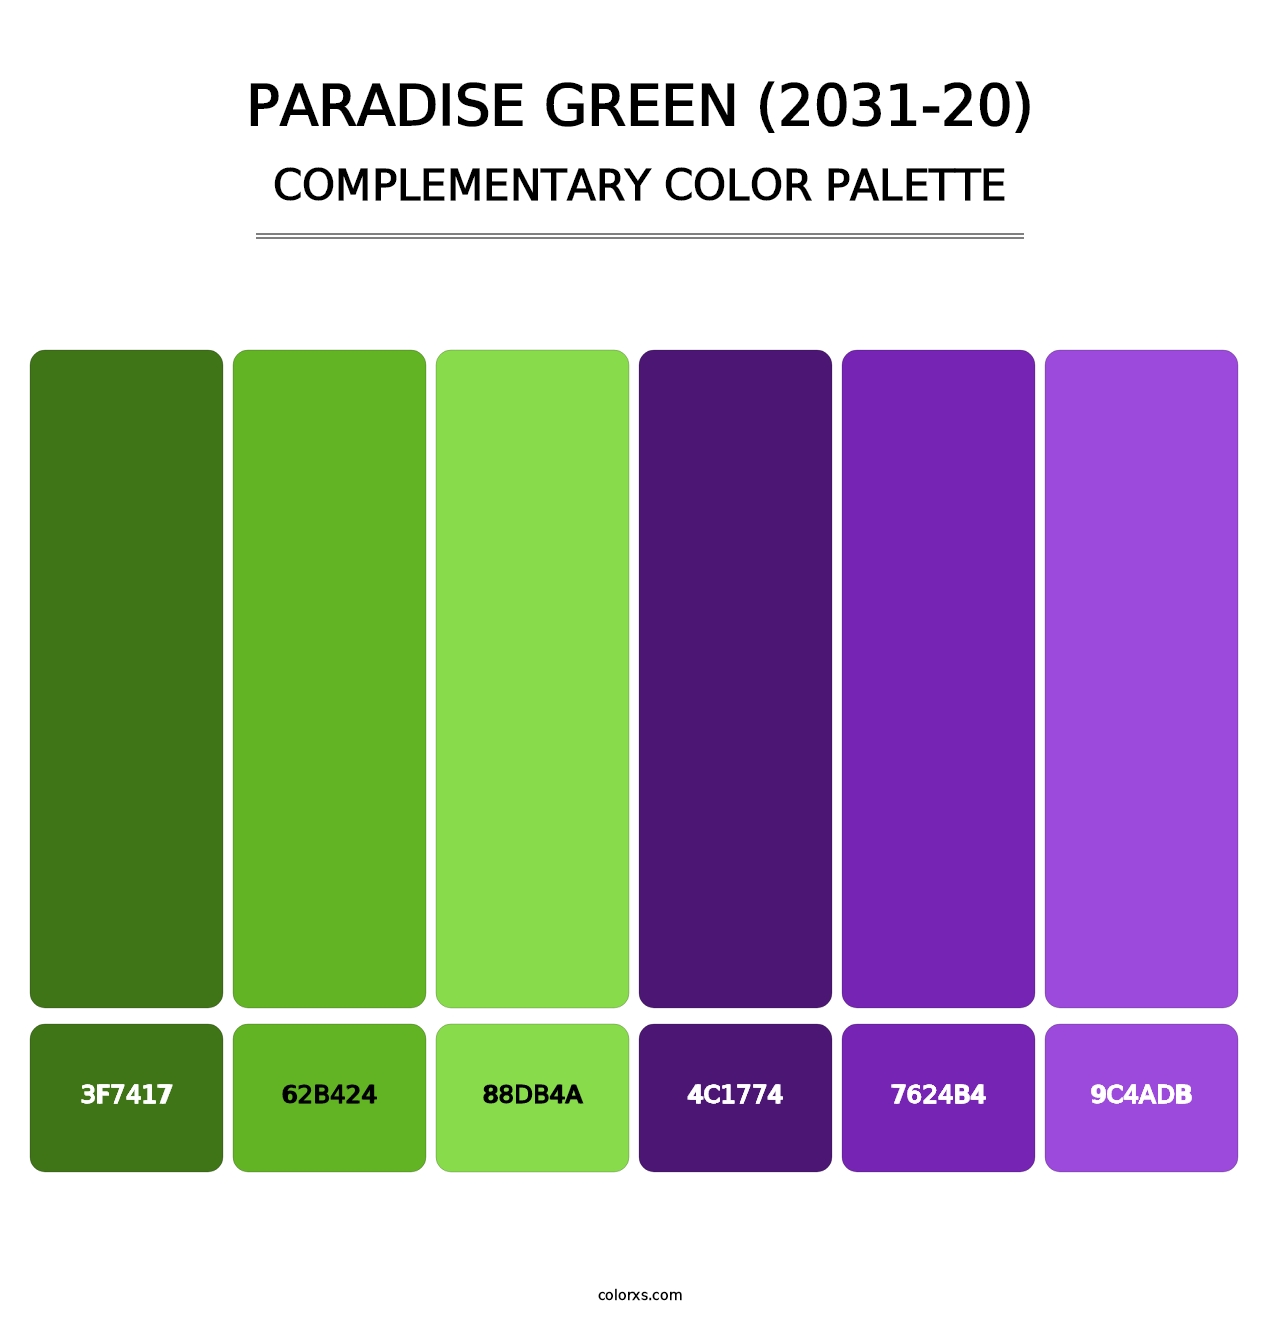 Paradise Green (2031-20) - Complementary Color Palette